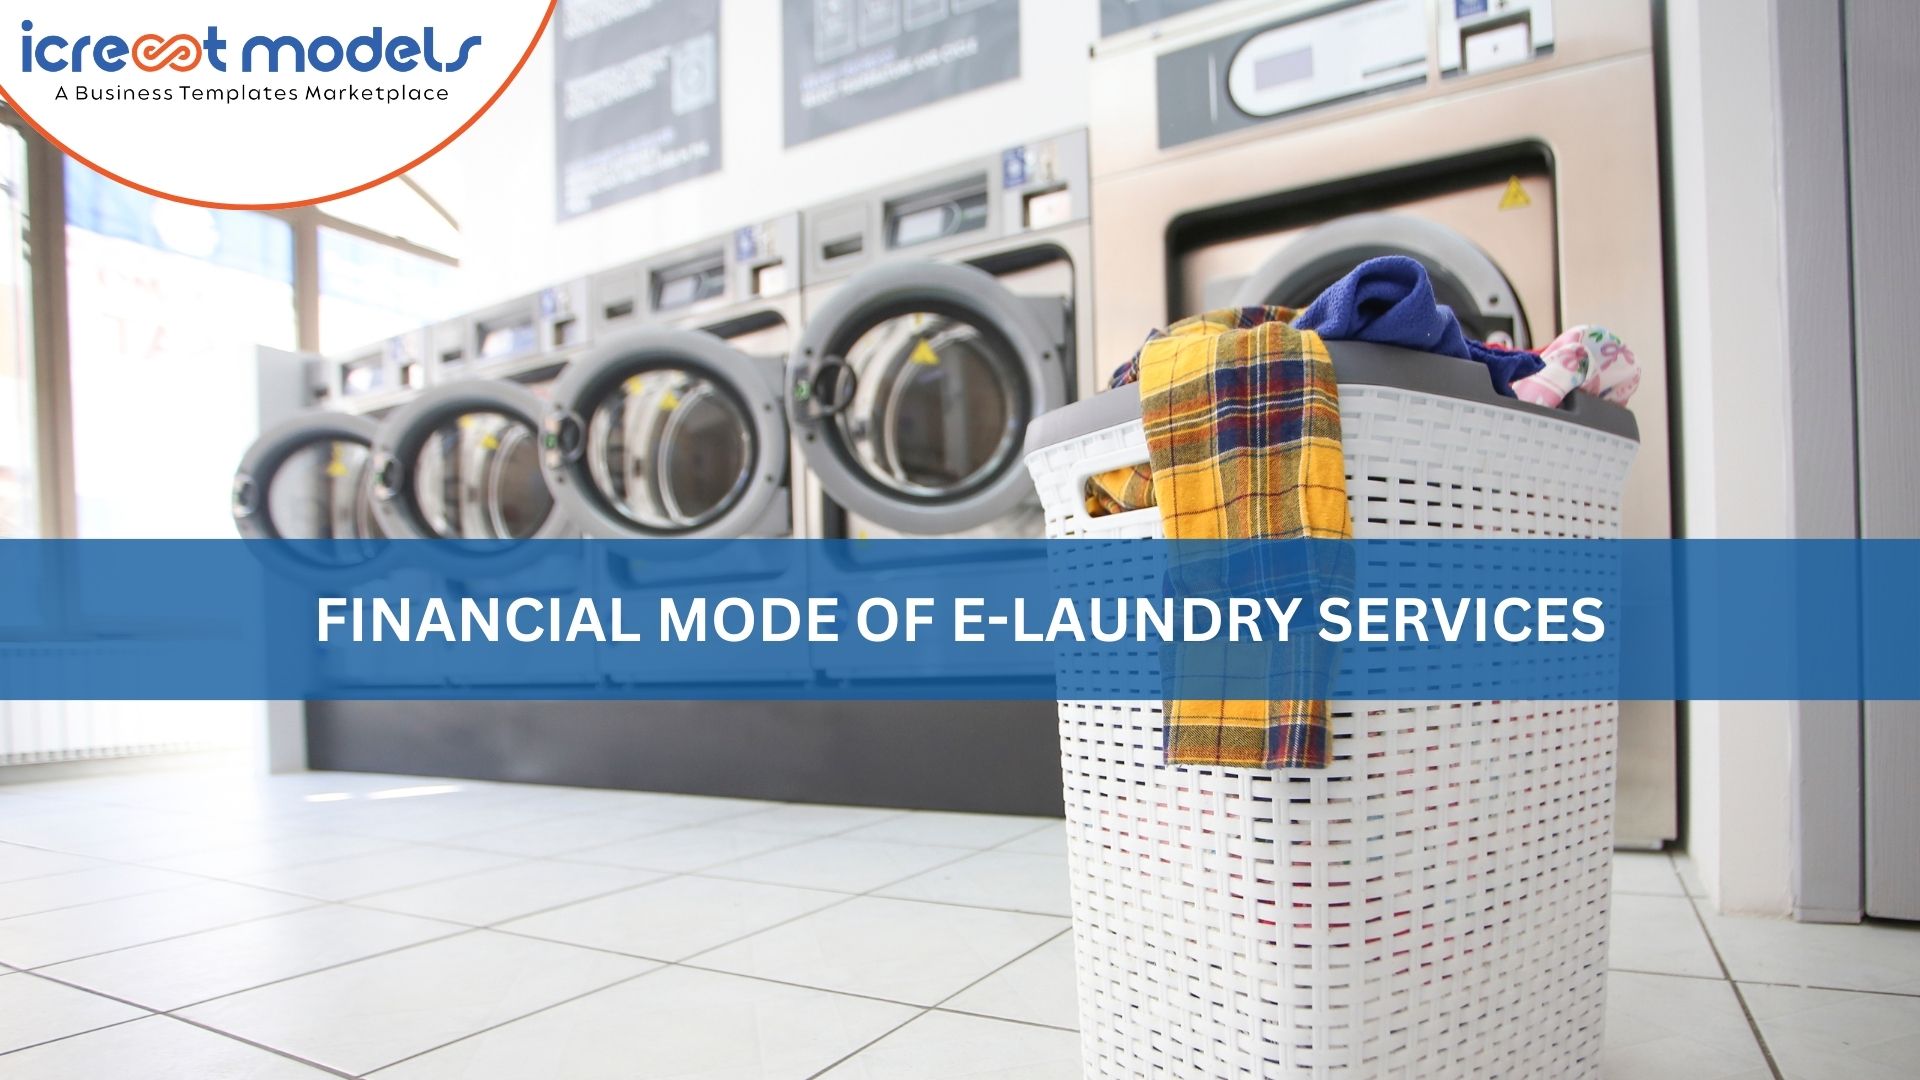 Financial Mode of E-Laundry Services